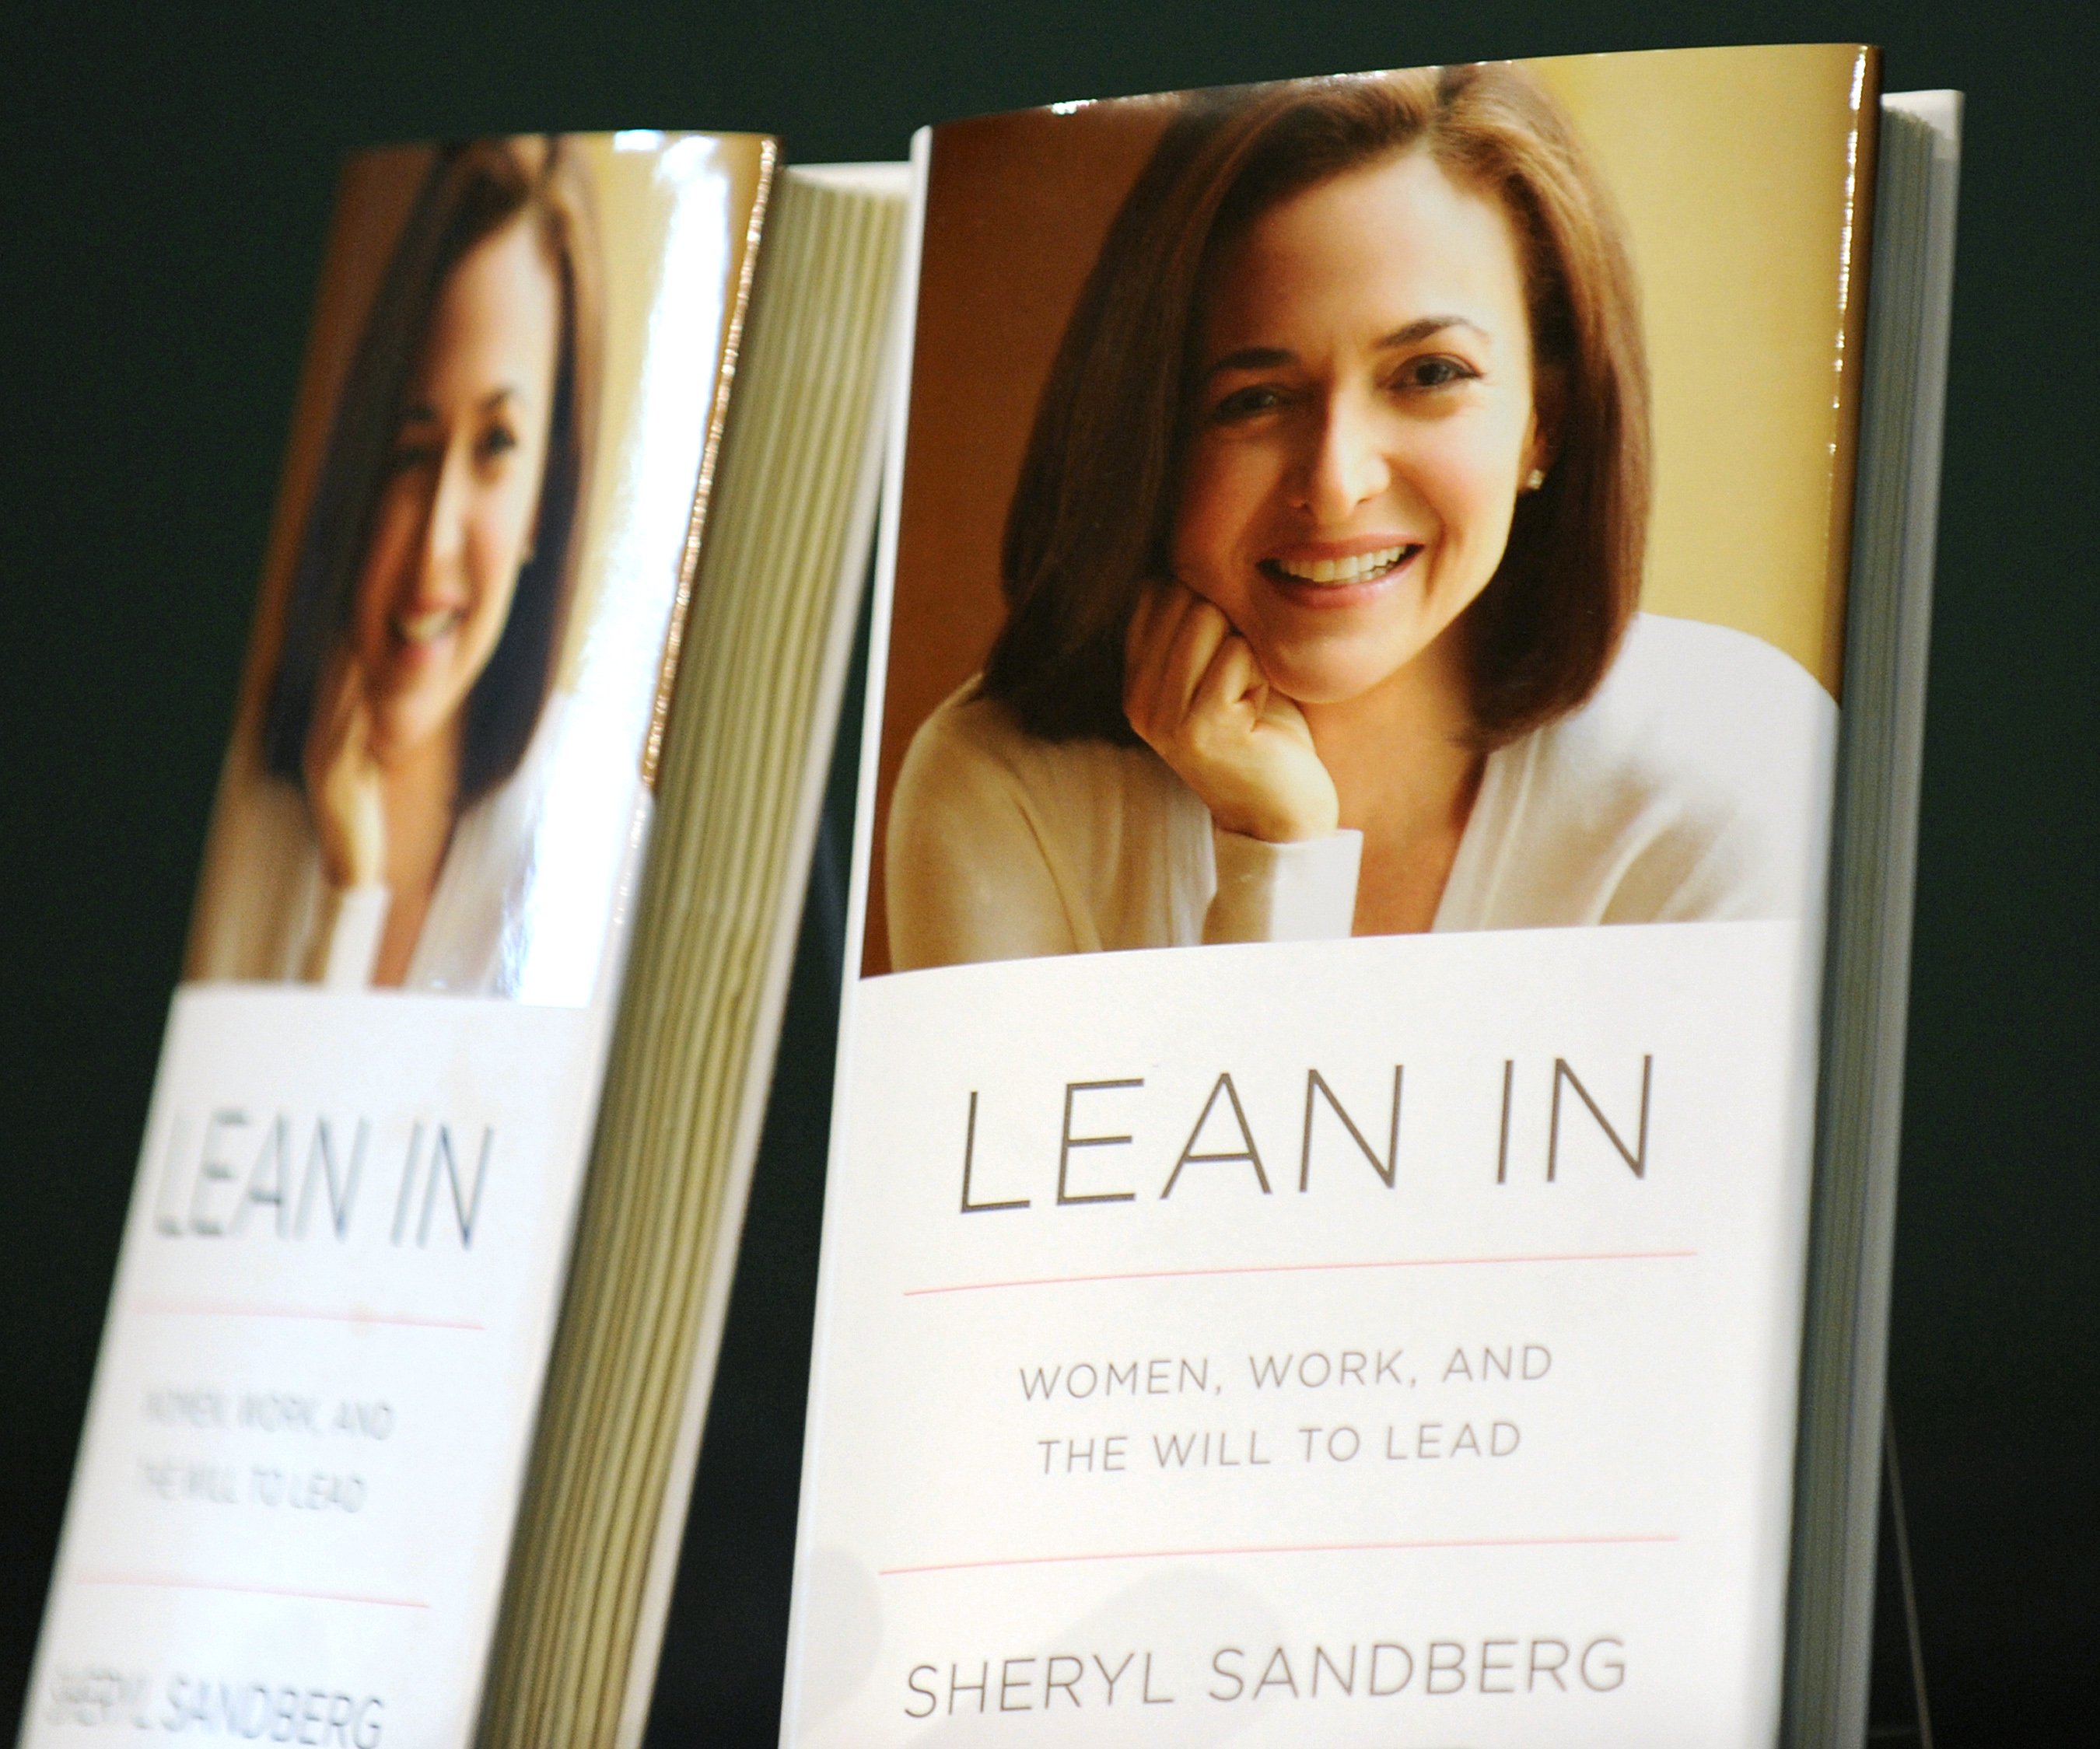 A display of "Lean In" by Sheryl Sandberg at a Barnes & Noble Inc. store in New York | Source: Getty Images